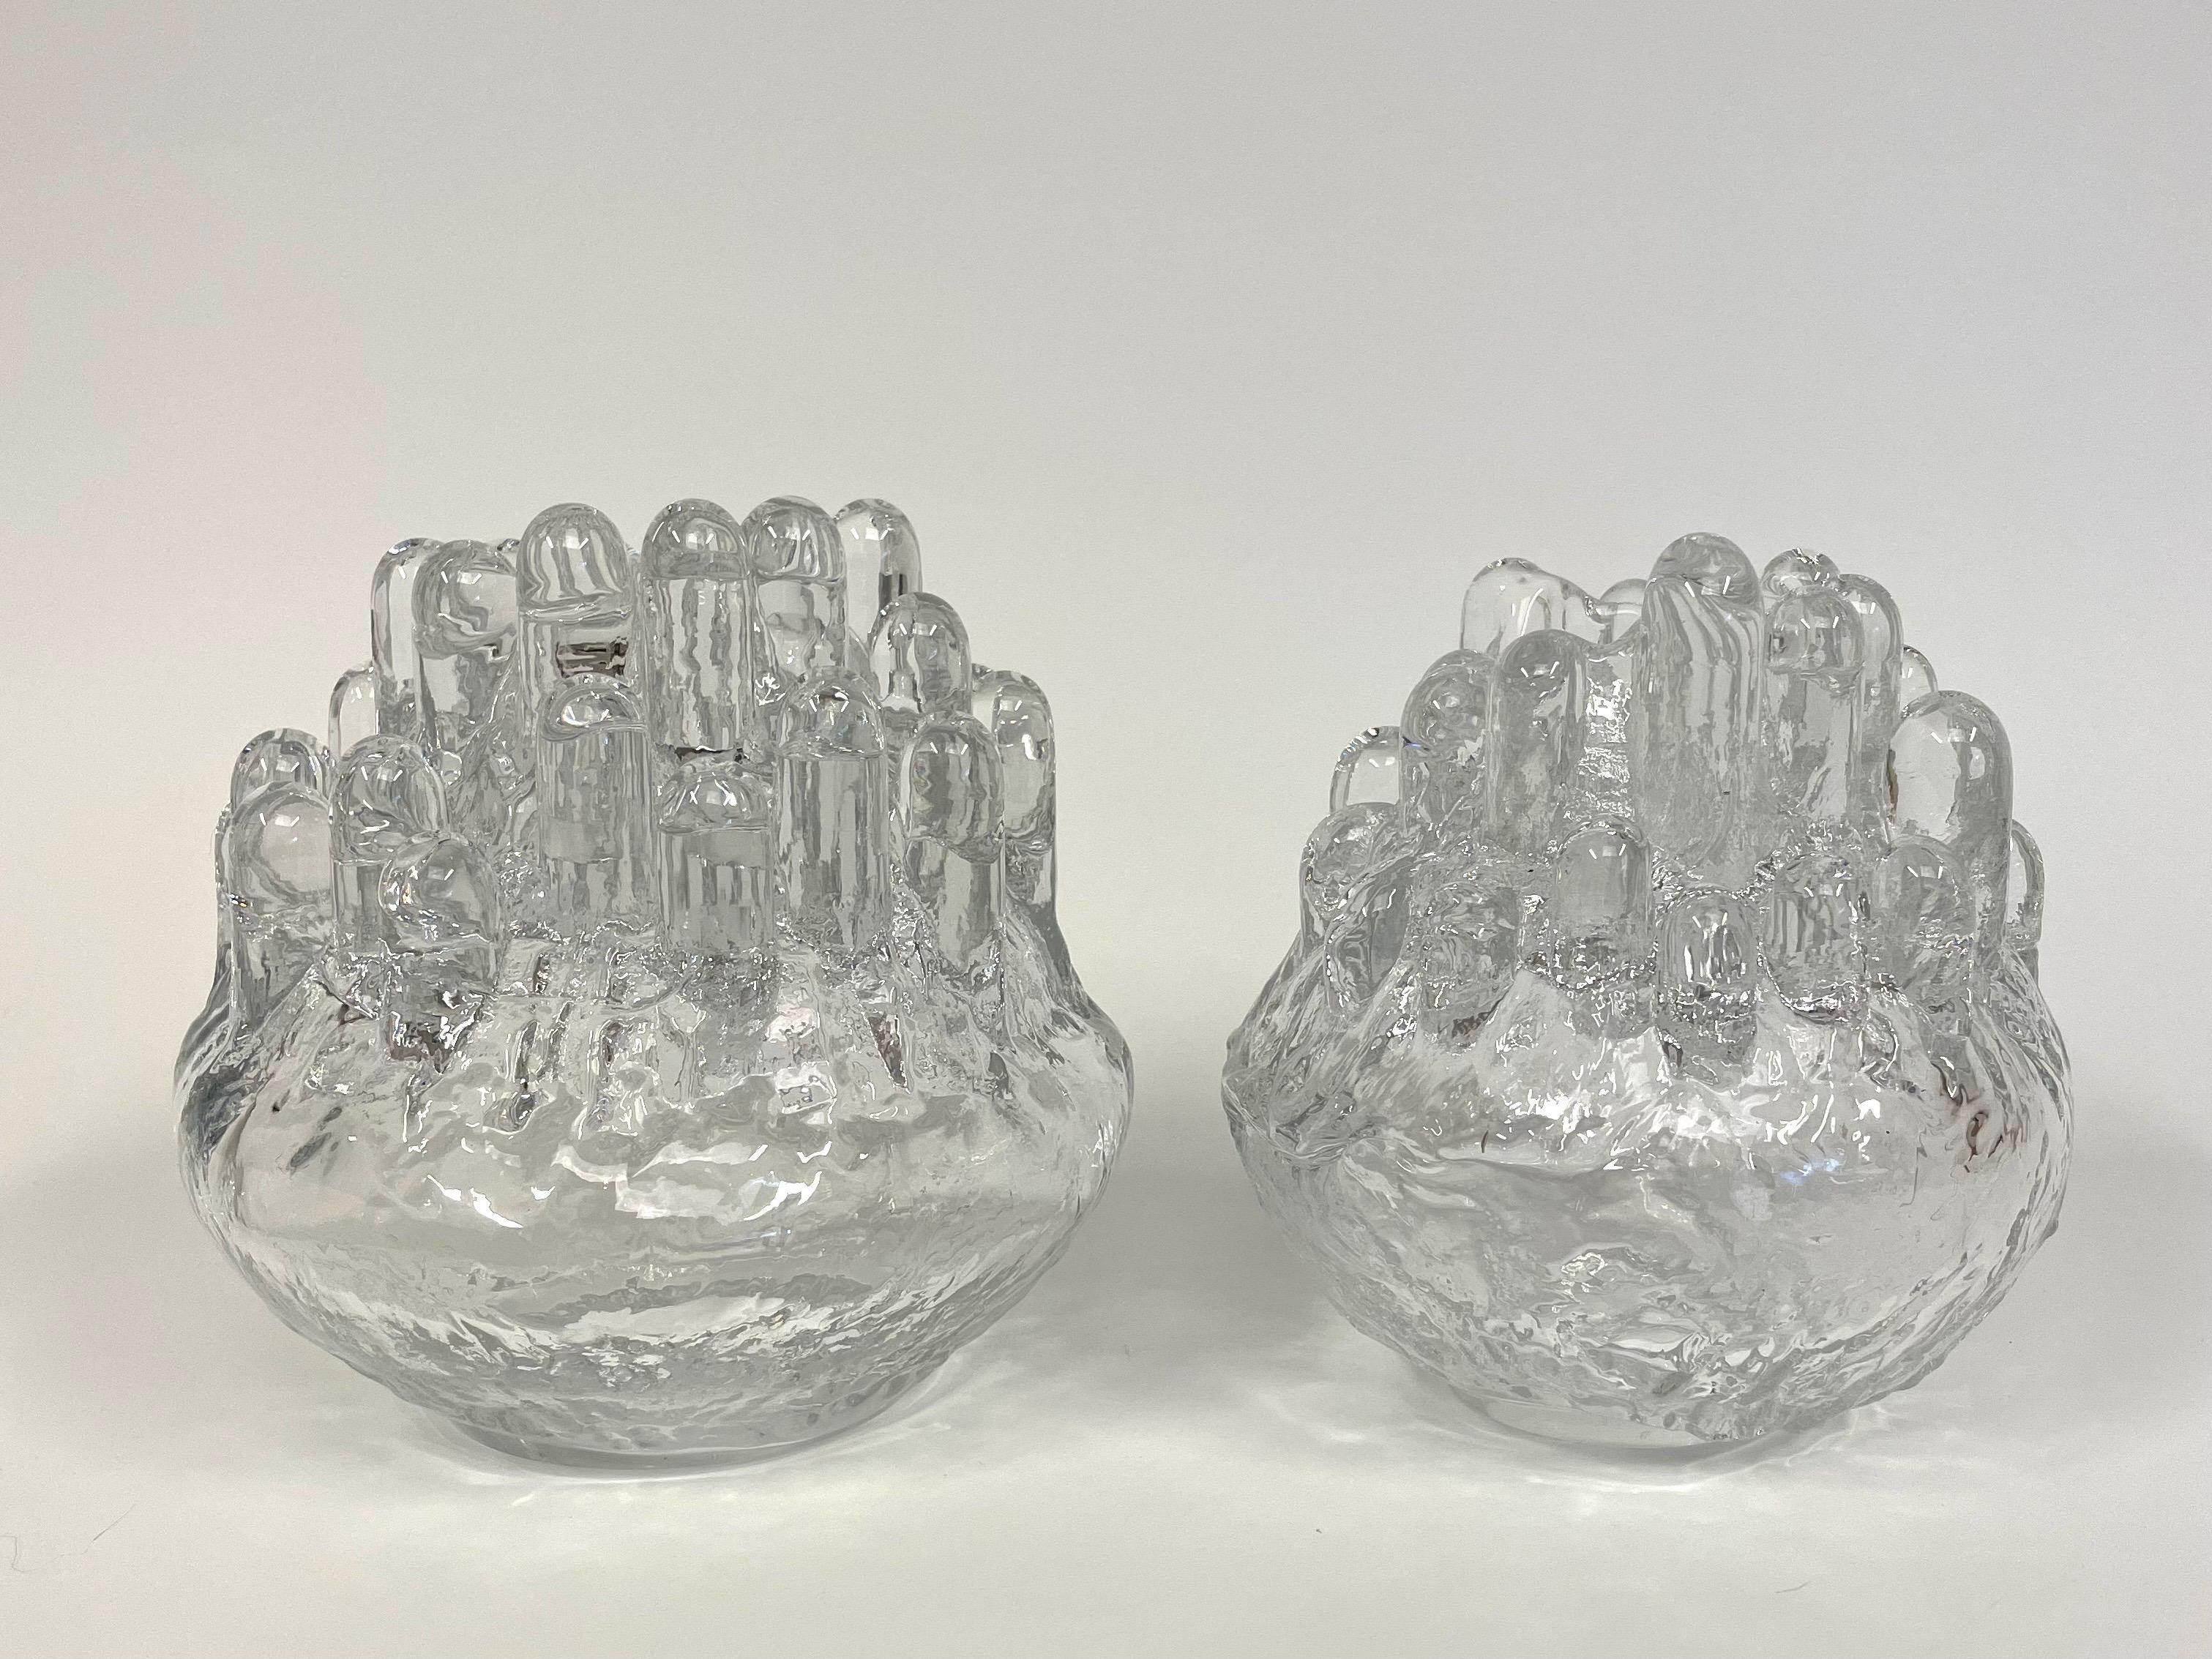 This is a pair of Polar crystal lantern in two different sizes by Swedish glass artist Göran Wärff for Kosta Glasbruk. 

It comes in bright crystal with a form that brings to mind a stalactite-like ice sculpture. 
The glass mass is transparent and